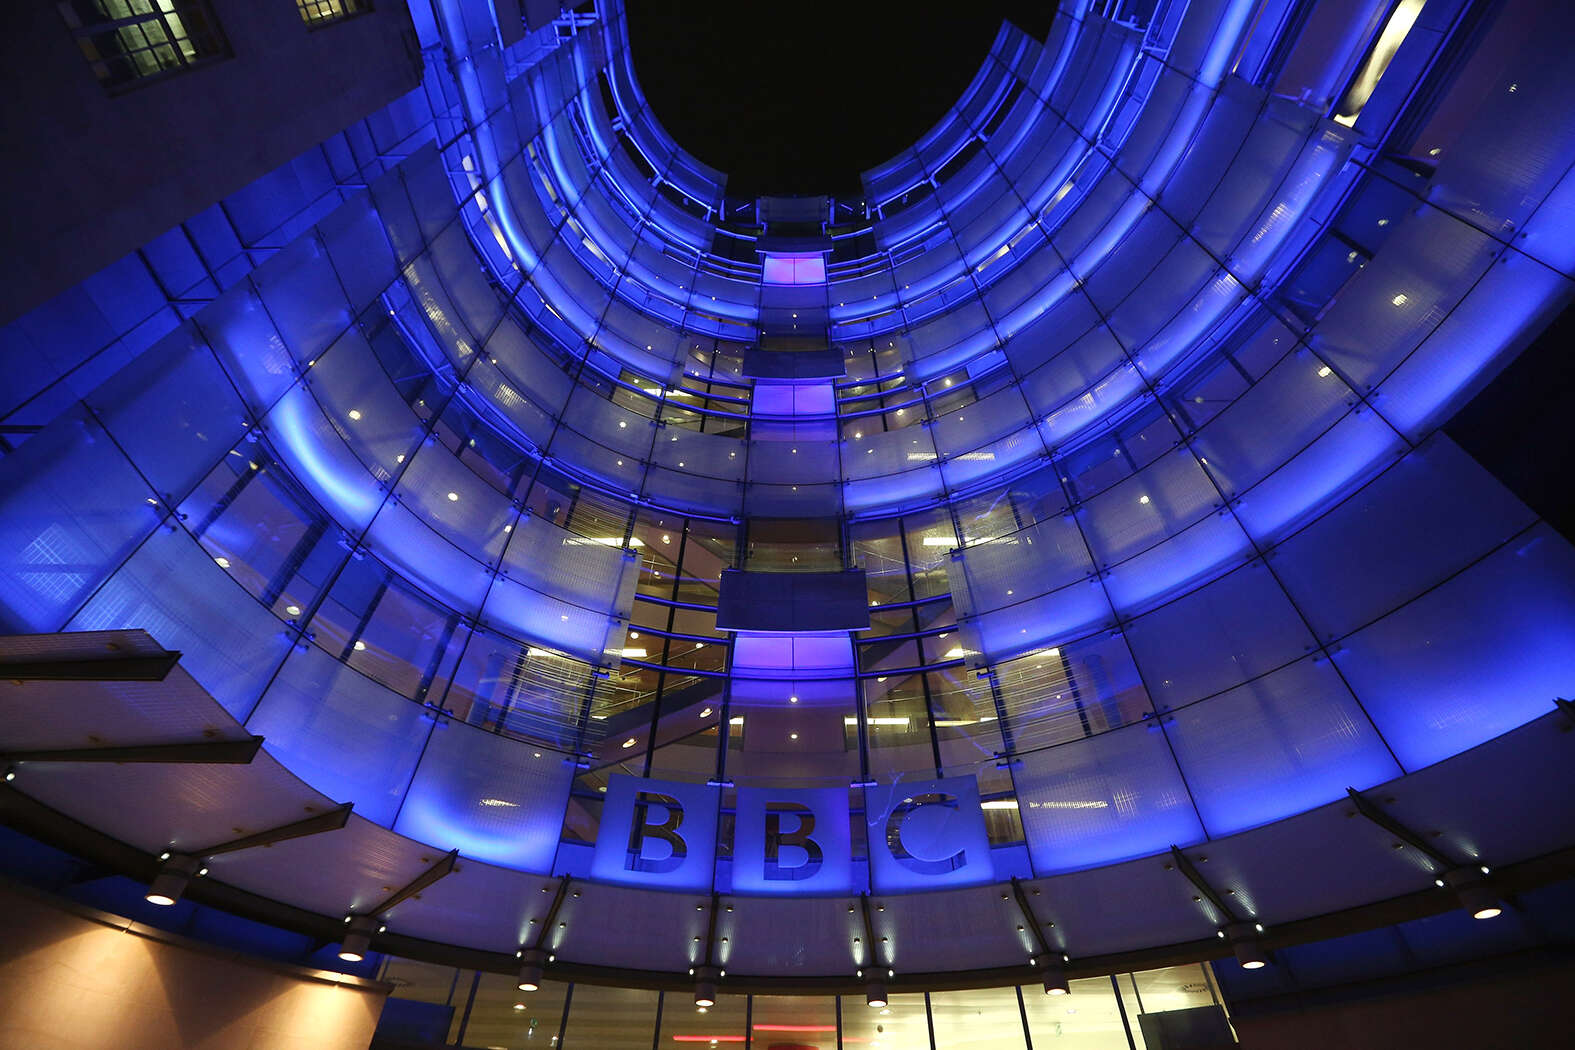 In defence of the BBC licence fee